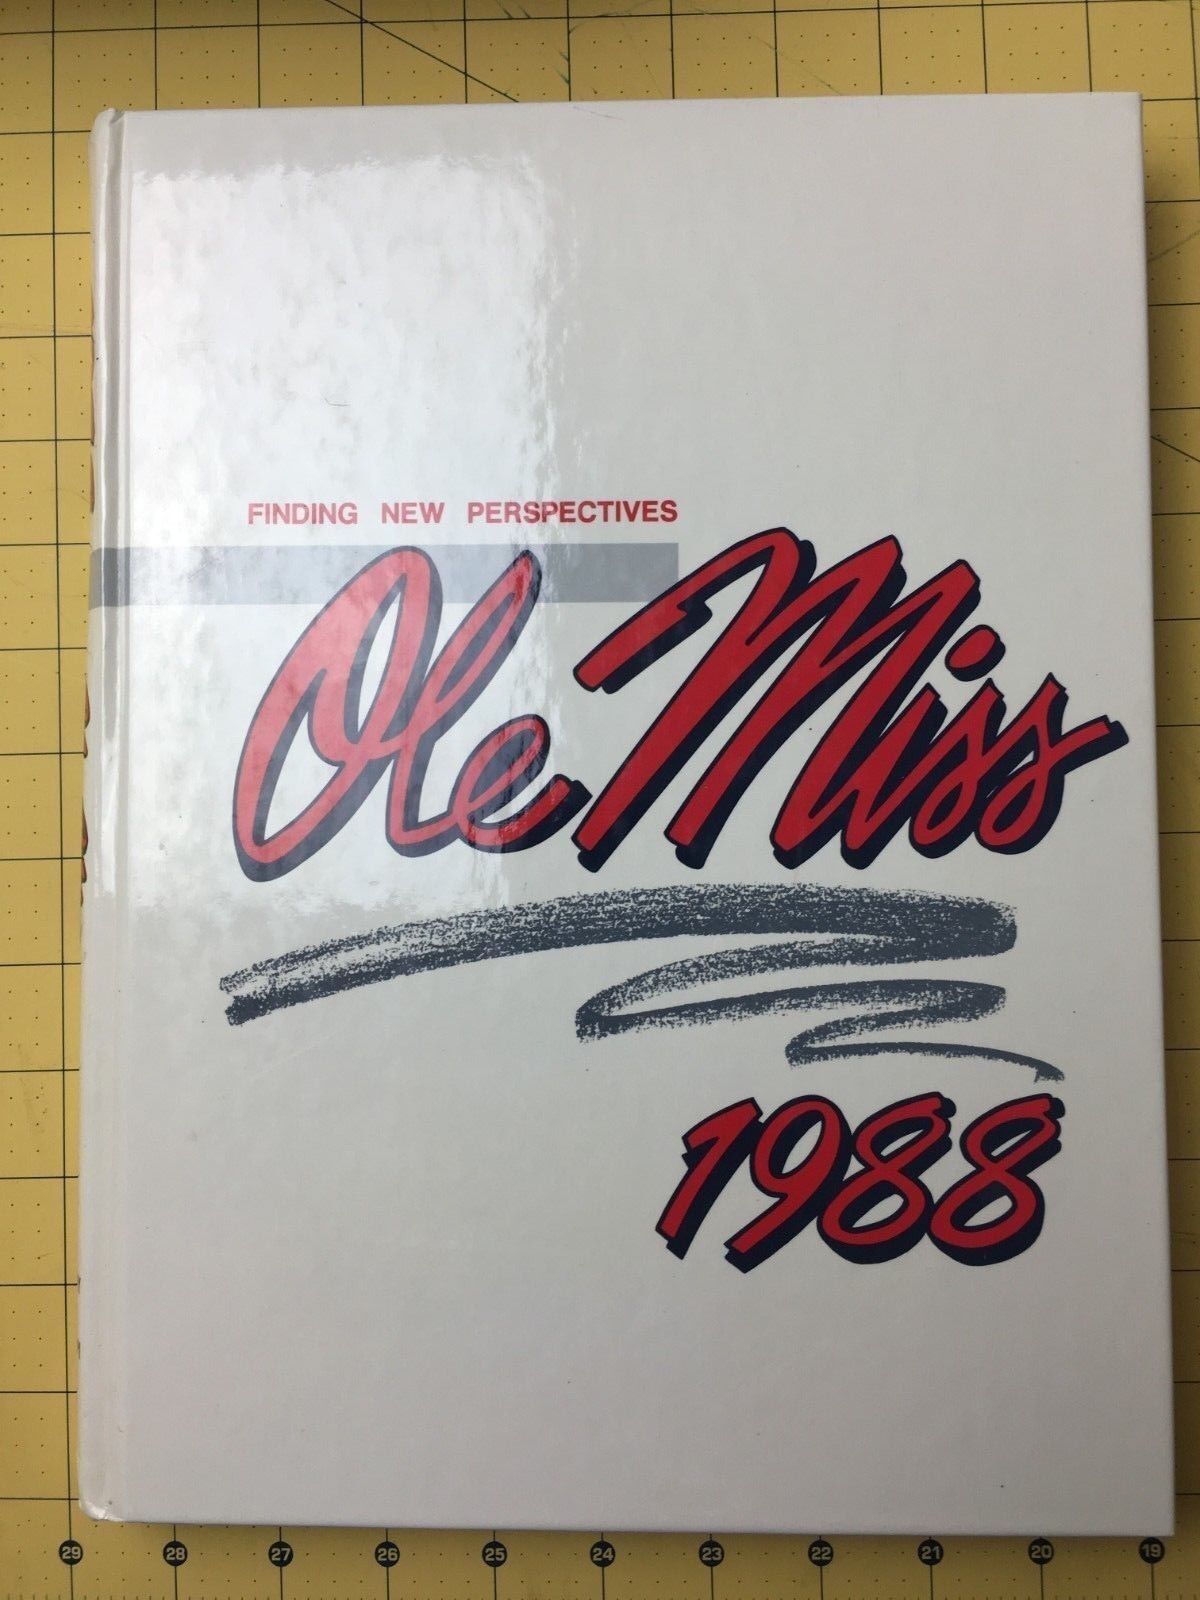 Ole Miss Mississippi University 1988 Yearbook Annual Hotty Toddy